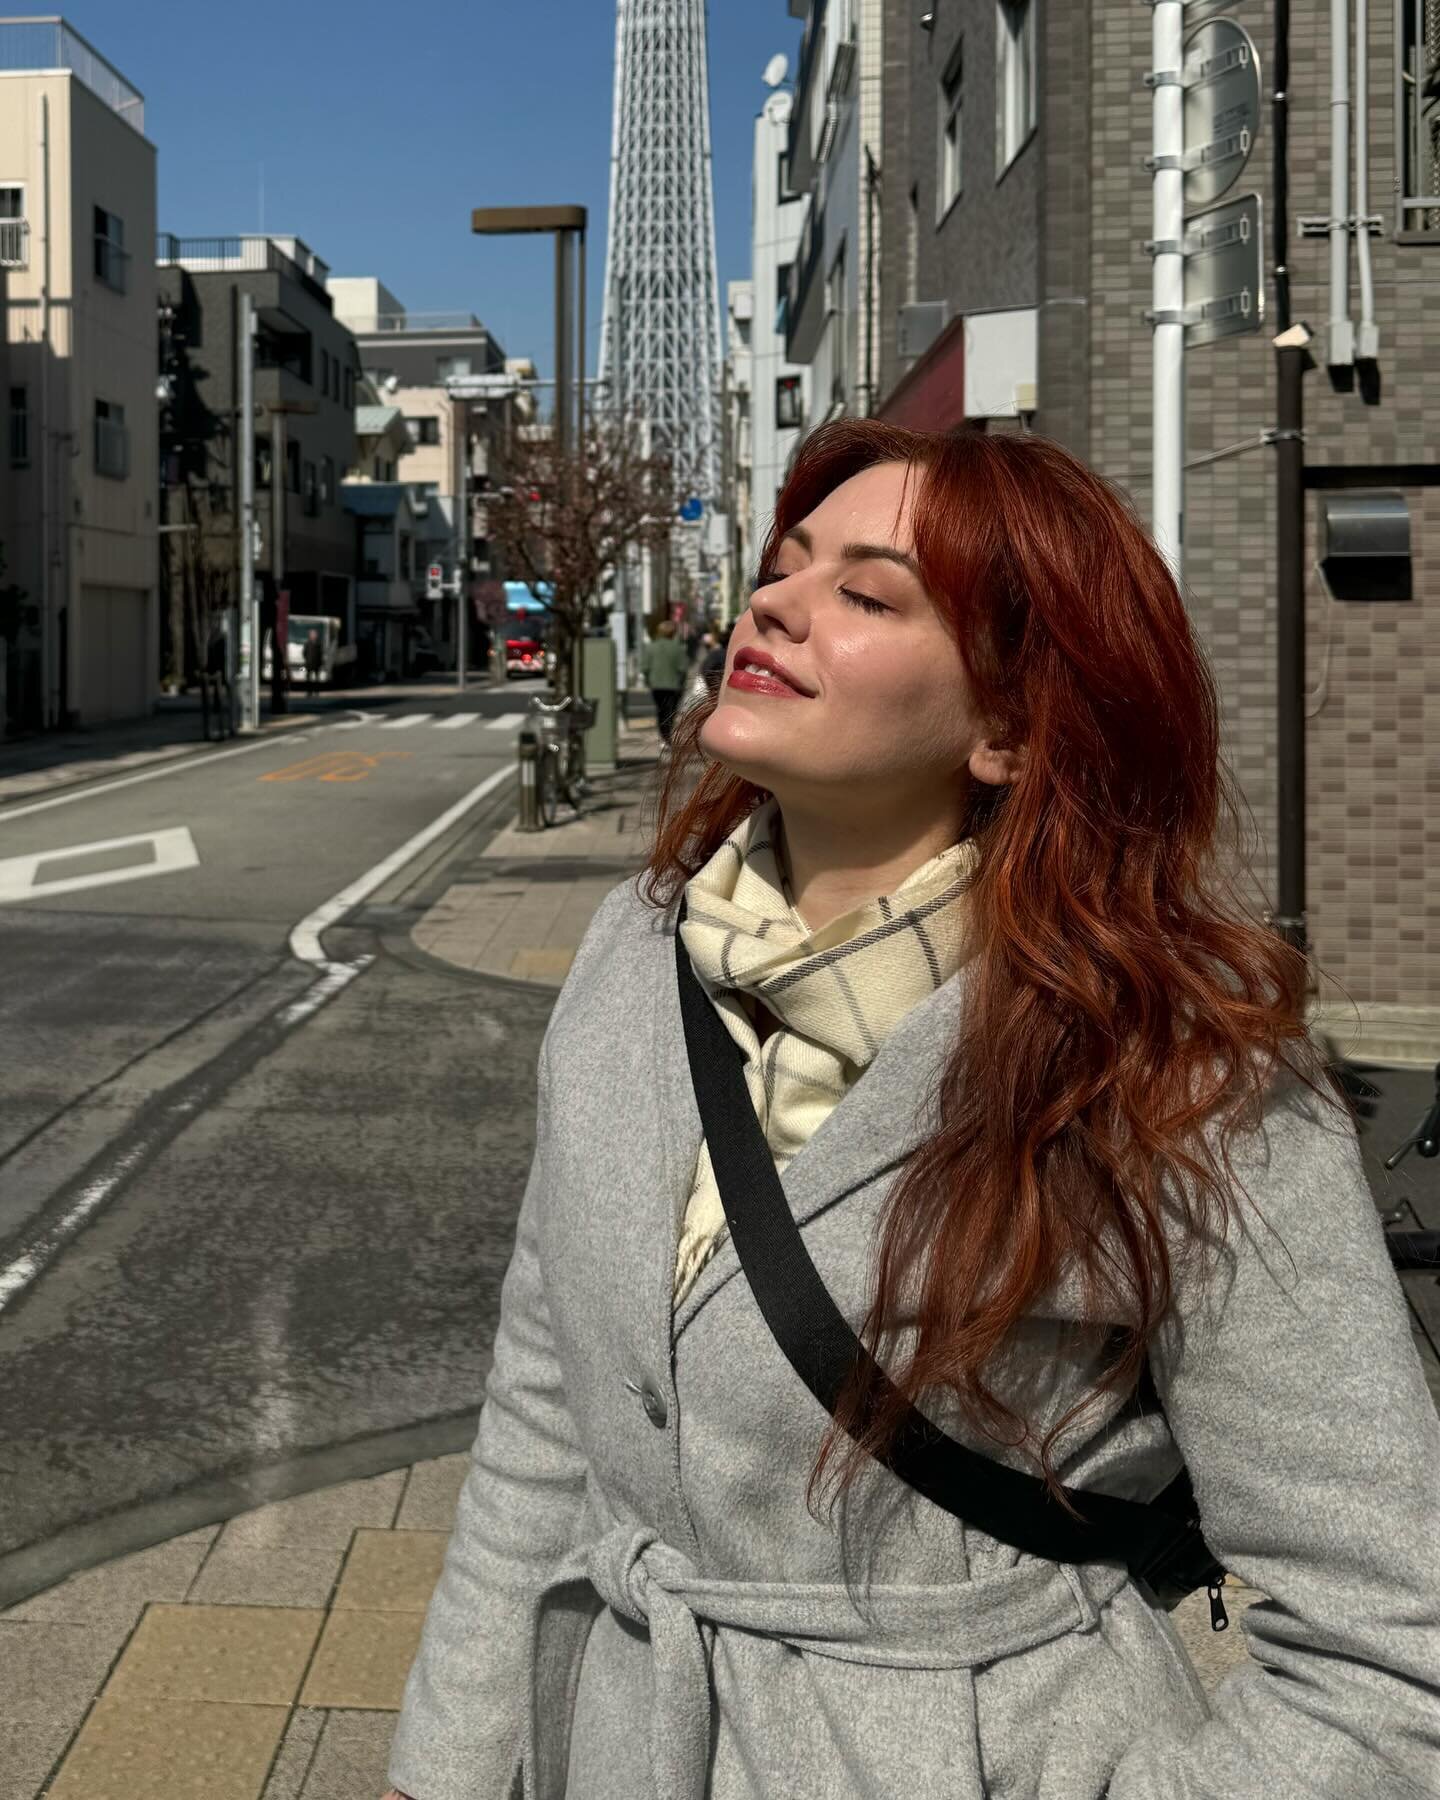 #nofilter, unless you count Japanese skincare, winter sun, and knowing I&rsquo;m about to eat from konbini 🥰

📸: @itsthecwolf 

#tokyo #japan #tokyoskytree #japantrip